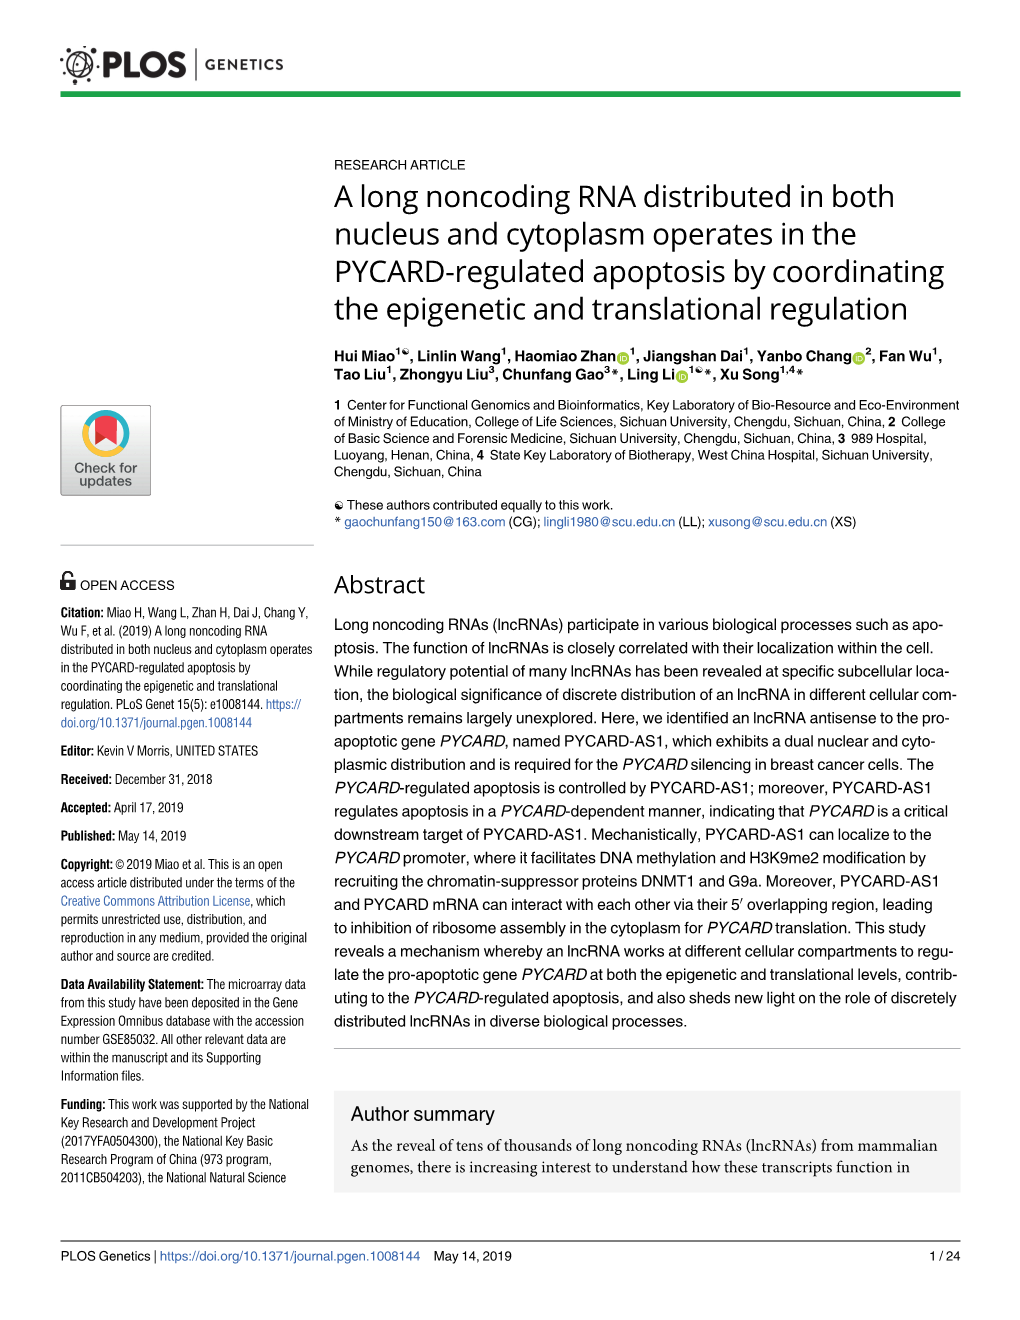 A Long Noncoding RNA Distributed in Both Nucleus and Cytoplasm Operates in the PYCARD-Regulated Apoptosis by Coordinating the Epigenetic and Translational Regulation